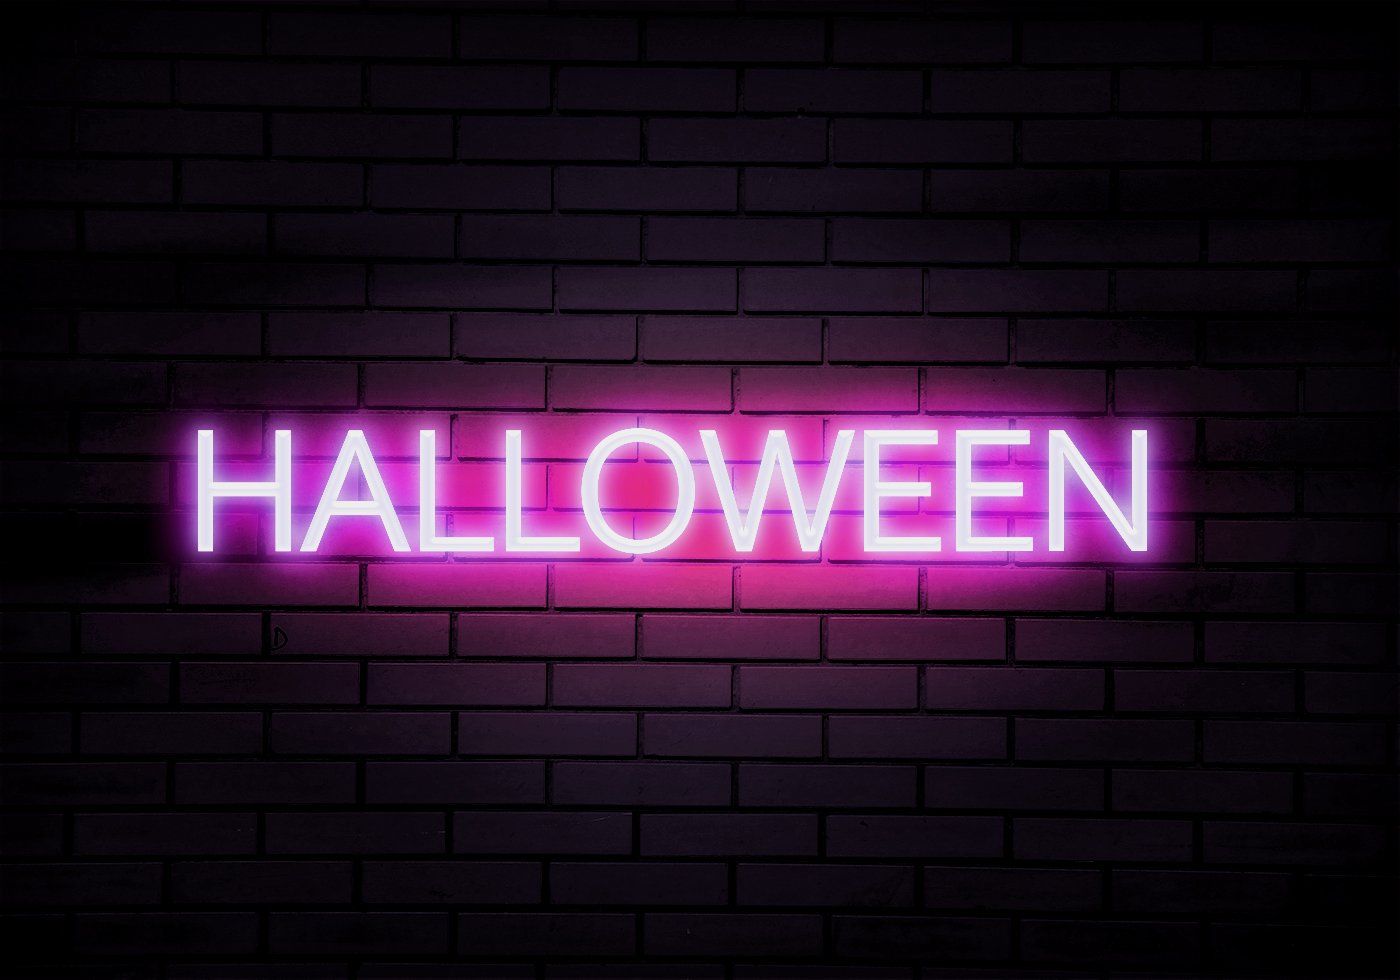 Spooky Halloween Text Effect Mock Up Photohop Brushes at Brusheezy!